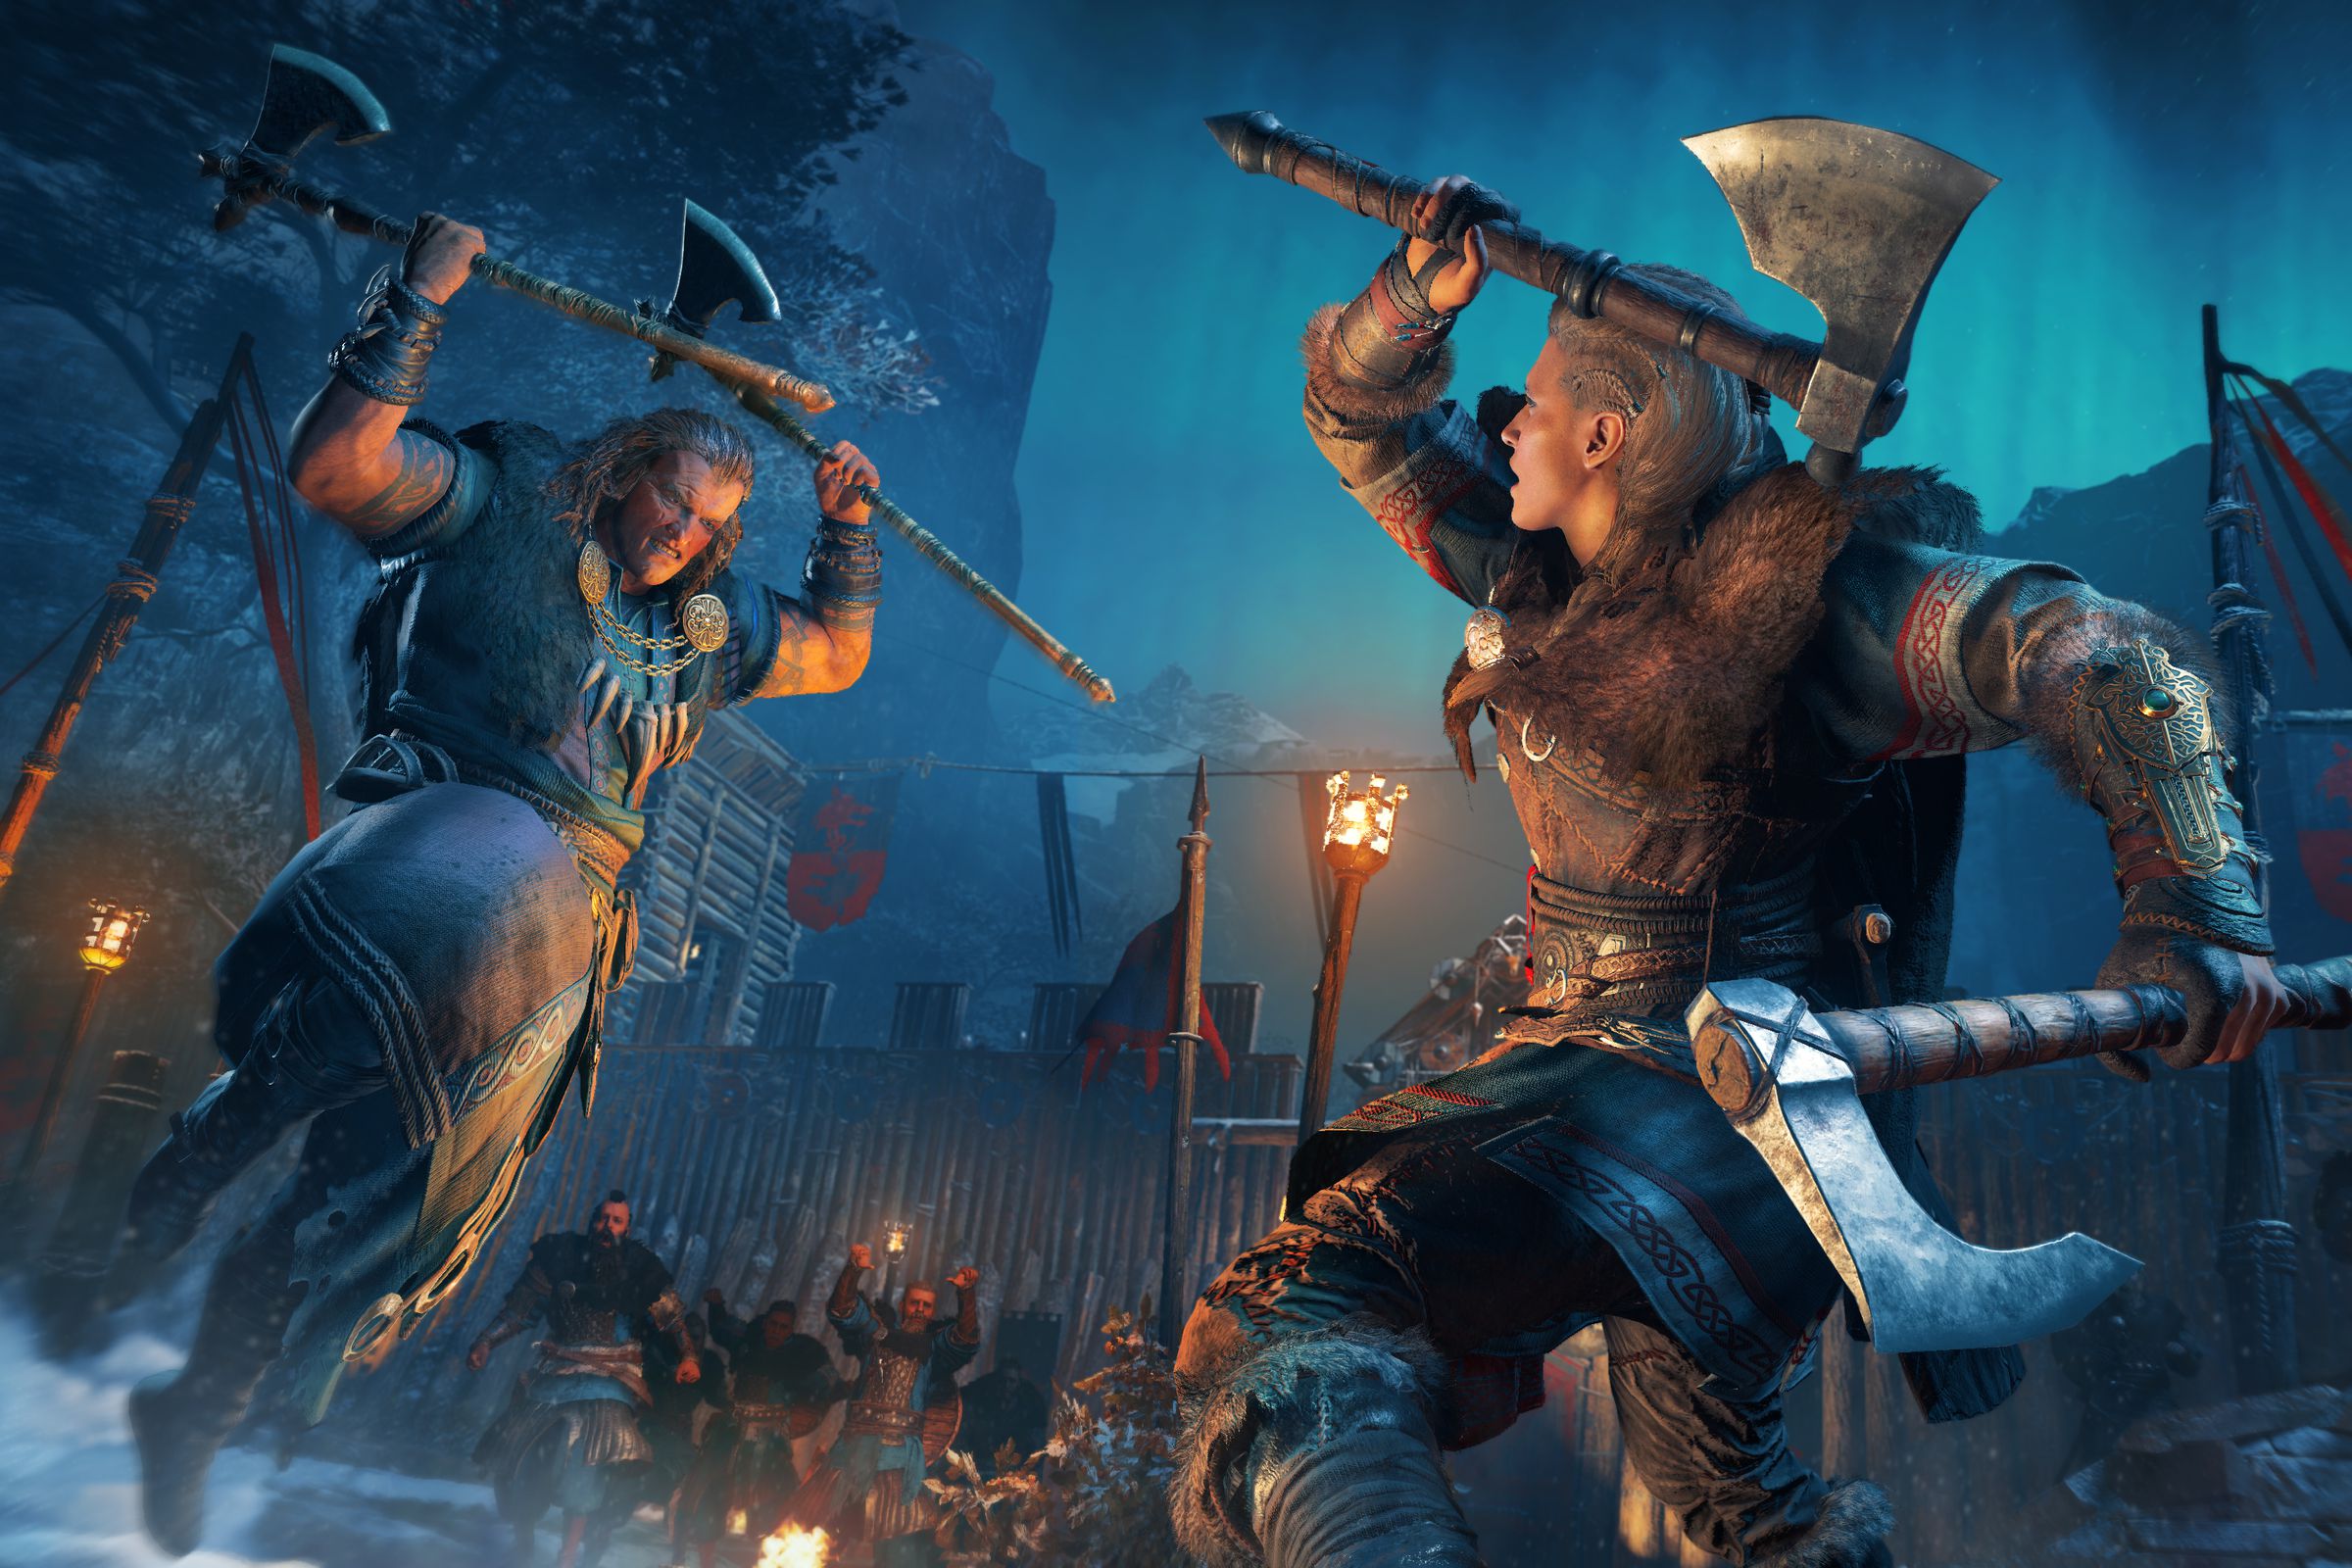 Promotional art for Assassin’s Creed Valhalla showing two characters fighting with hand axes.